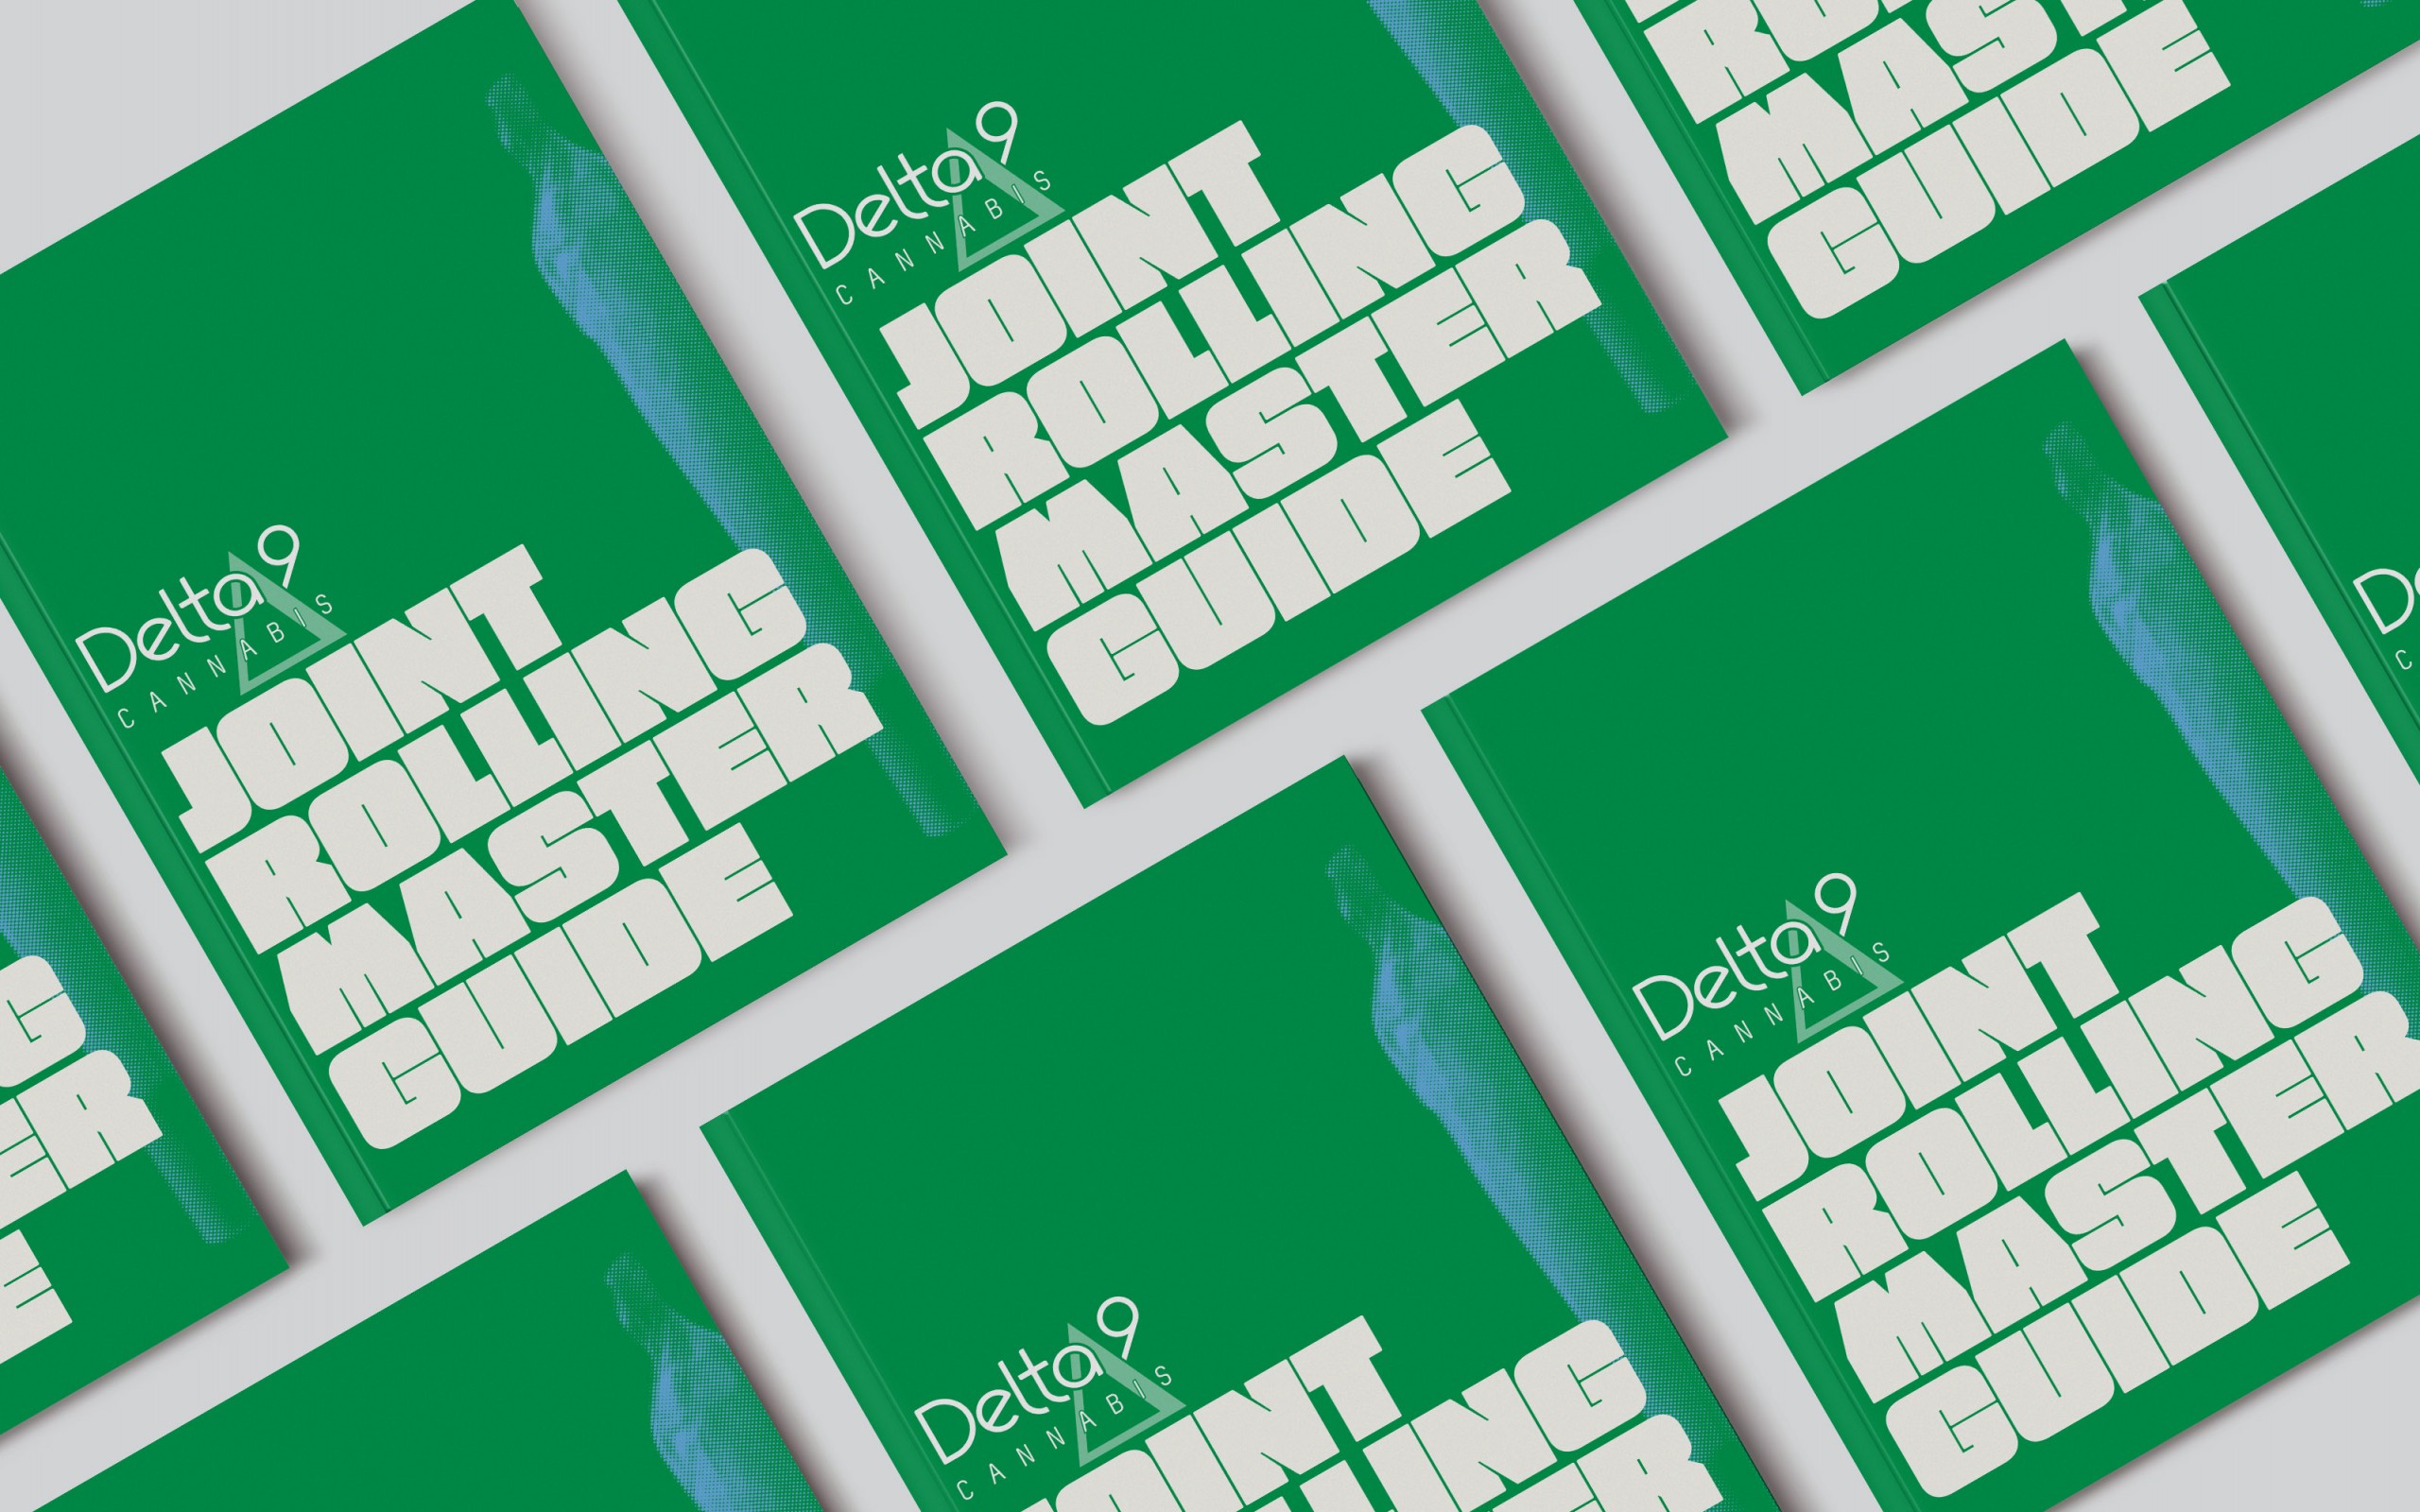 Several Delta9 Joint Rolling handbooks spread evenly across a white background.